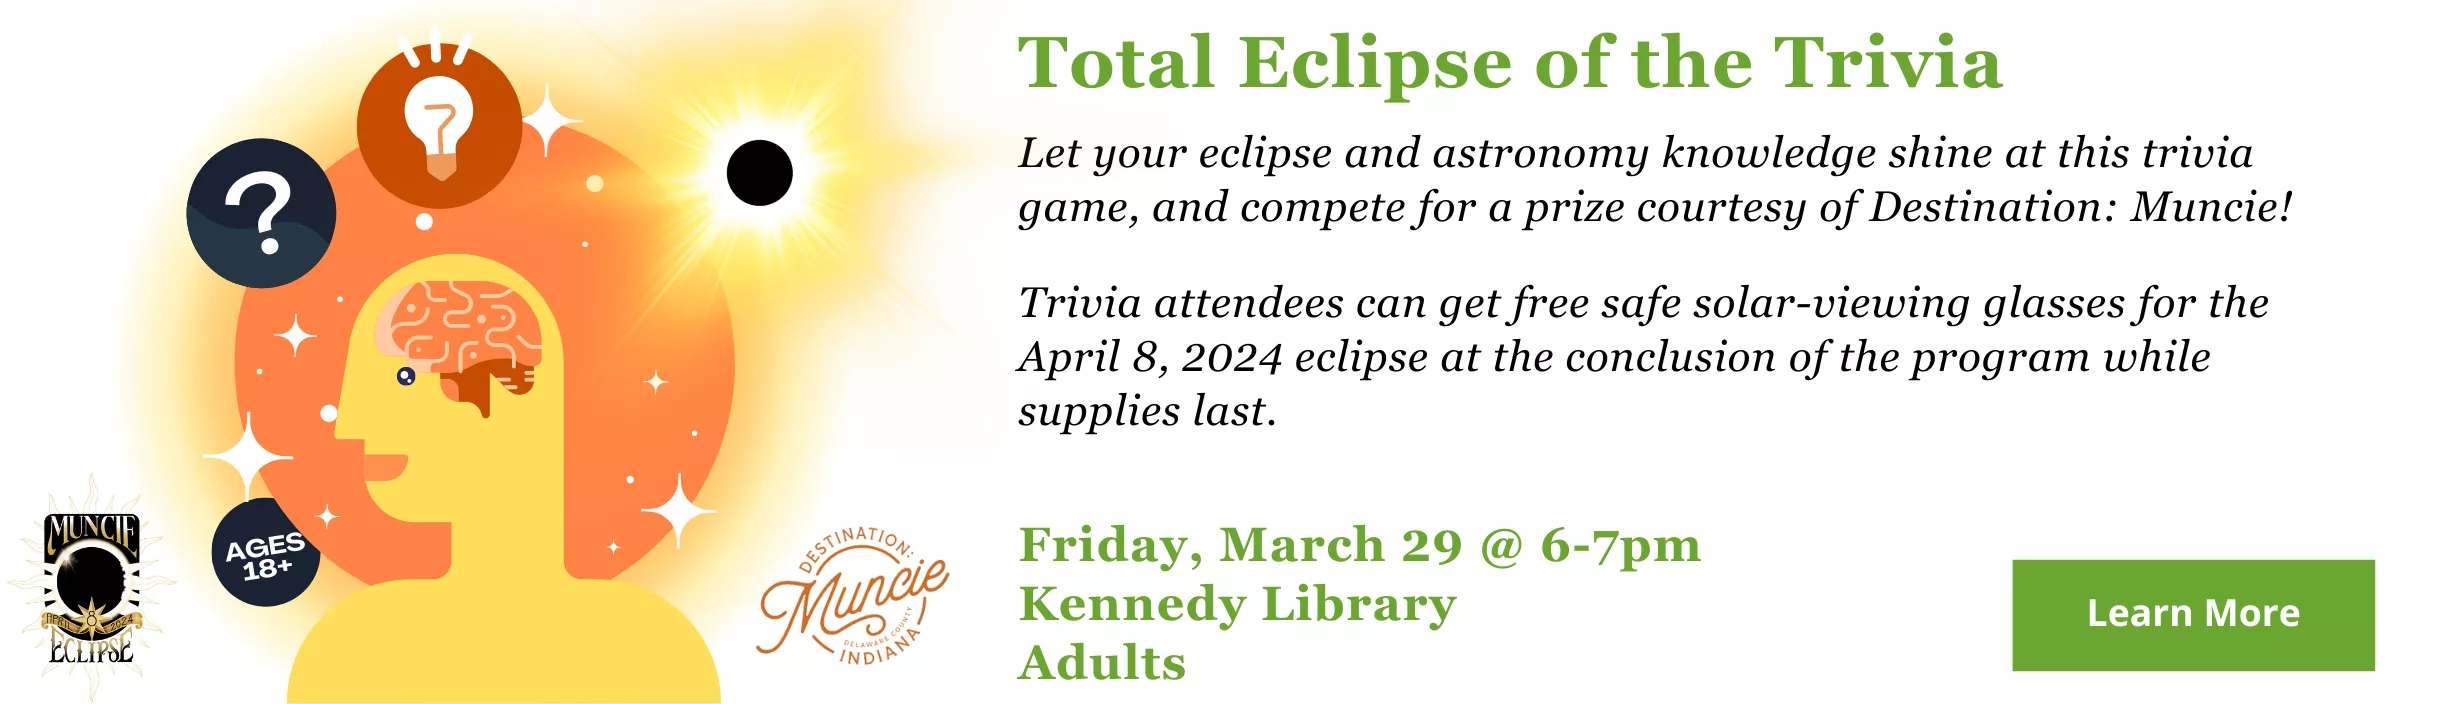 Total Eclipse of the Trivia